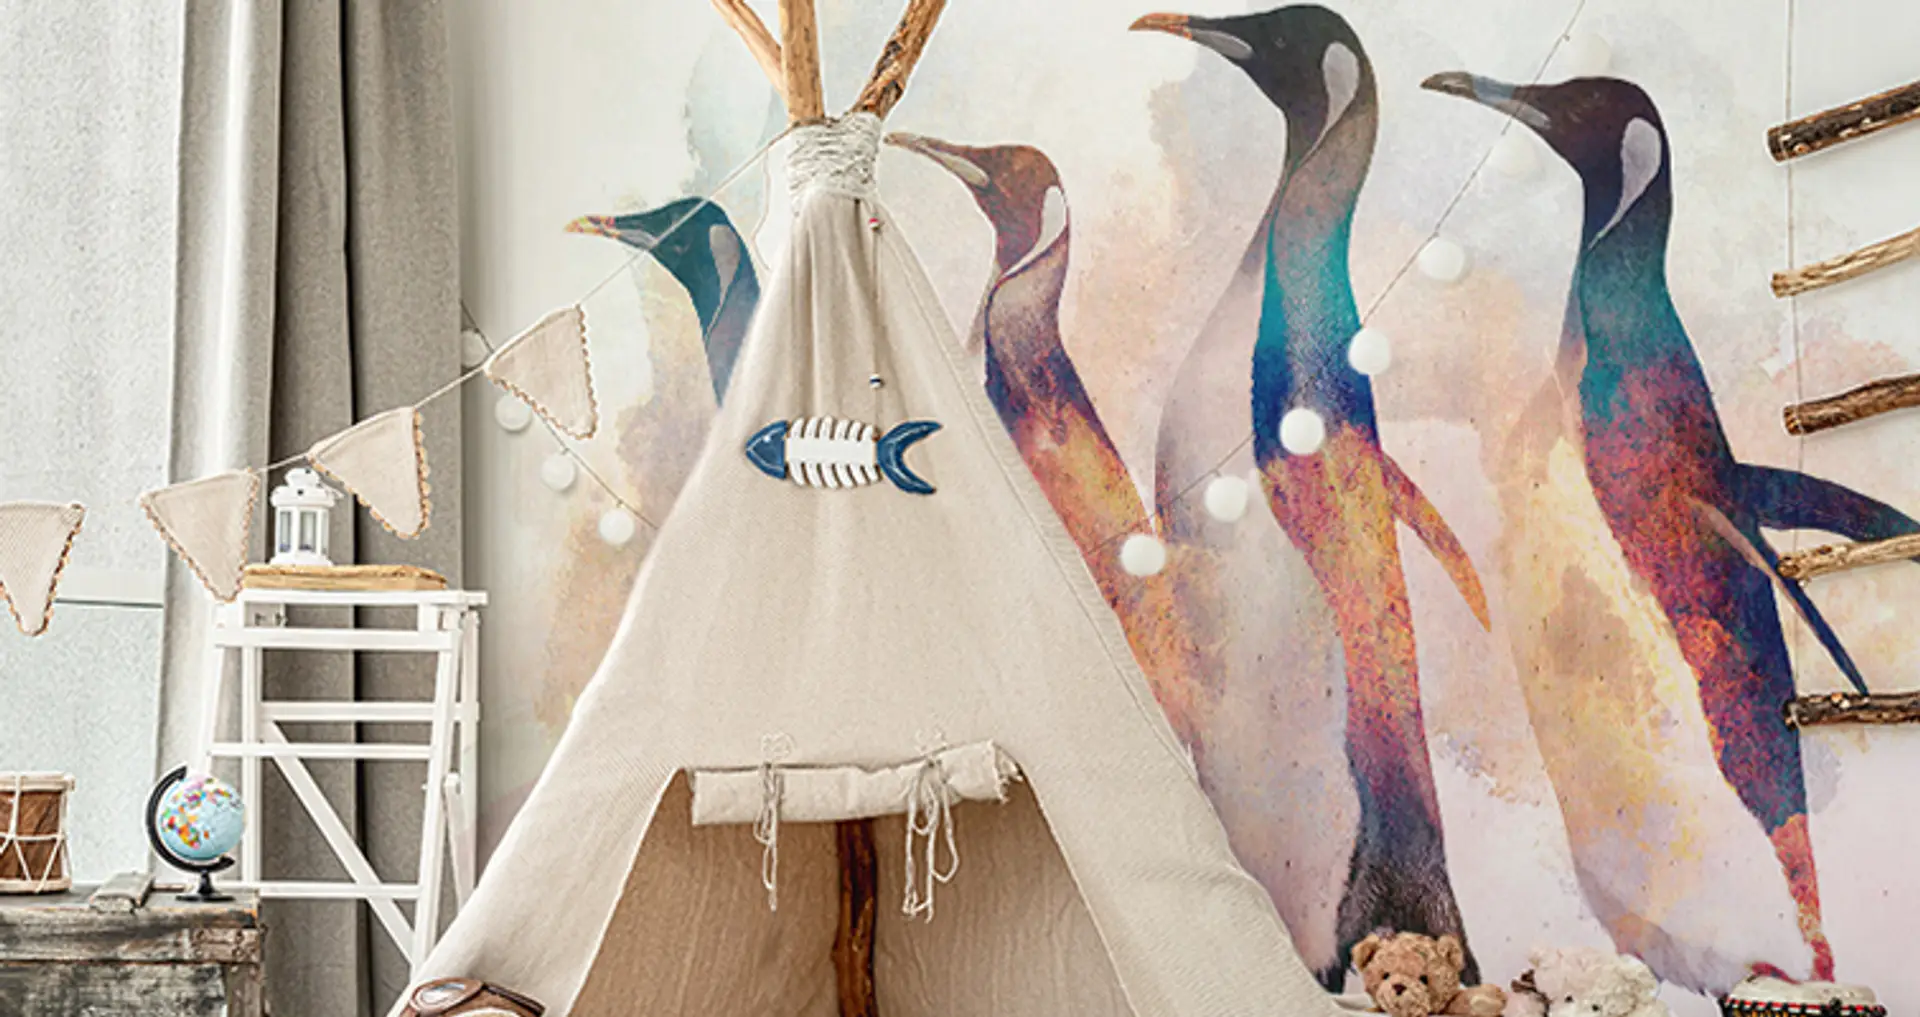 childs room inspirations